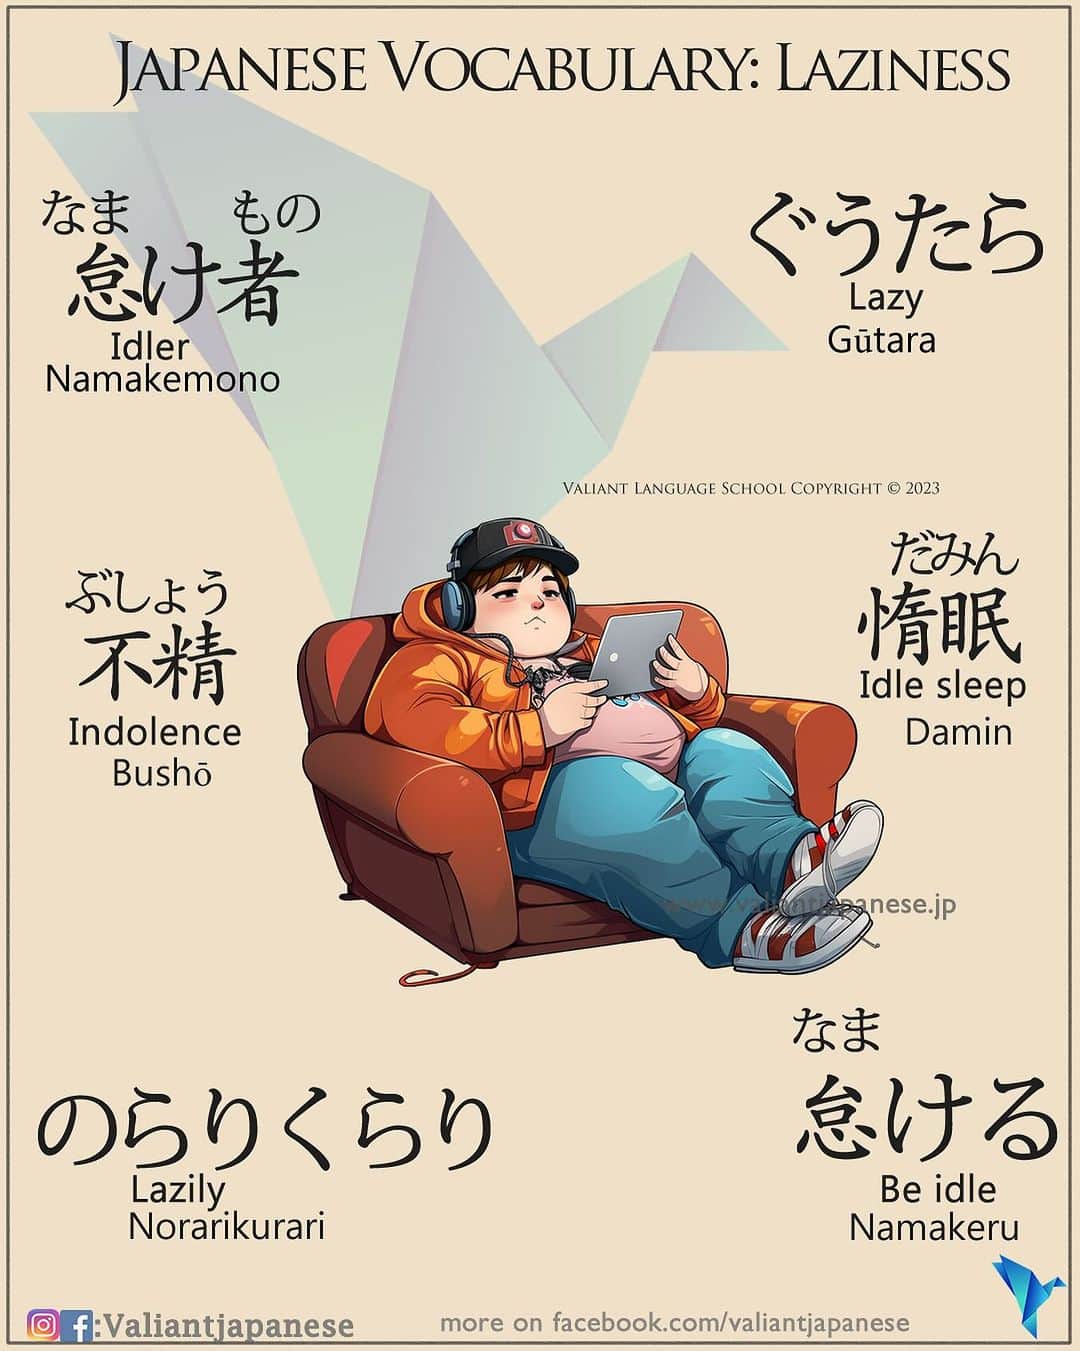 Valiant Language Schoolさんのインスタグラム写真 - (Valiant Language SchoolInstagram)「Example Sentences below 👇 New Group Lessons starting in October ⛩📓: Simple Japanese - Laziness 😴  怠ける (Nameru) - Meaning: "to be lazy" or "to idle"  Example Sentence: 彼は毎日怠けてばかりいて、何もしない。 (Kare wa mainichi namerete bakari ite, nanimo shinai.) Translation: He's lazy every day and does nothing. 不精 (Busyou) - Meaning: "indolence" or "laziness"  Example Sentence: 彼の不精さは仕事の進捗を遅らせている。 (Kare no busyou-sa wa shigoto no shinchoku o okuraseteiru.) Translation: His indolence is slowing down the progress of the work. 怠け者 (Namemono) - Meaning: "lazy person" or "idler"  Example Sentence: 彼は本当に怠け者で何もしない。 (Kare wa hontou ni namemono de nanimo shinai.) Translation: He's truly a lazy person who does nothing. のらりくらり (Norarikurari) - Meaning: "lazily" or "sluggishly"  Example Sentence: 彼はのらりくらりと仕事をしているように見える。 (Kare wa norarikurari to shigoto o shiteiru you ni mieru.) Translation: He appears to be working sluggishly. 惰眠 (Damin) - Meaning: "idle sleep" or "laziness in sleep"  Example Sentence: 惰眠を優先することは成果を上げる障害になることがあります。 (Damin o yuusen suru koto wa seika o ageru shougai ni naru koto ga arimasu.) Translation: Prioritizing idle sleep can be an obstacle to achieving results. 物怠け (Mononamuke) - Meaning: "procrastination" or "laziness in doing things"  Example Sentence: 物怠けをやめて、今すぐ仕事を始めましょう。 (Mononamuke o yamete, ima sugu shigoto o hajimemashou.) Translation: Let's stop procrastinating and start working right now. ぐうたら (Guutara) - Meaning: "lazy" or "sluggish" (colloquial)  Example Sentence: 彼はぐうたらで何もしない日が多い。 (Kare wa guutara de nanimo shinai hi ga ooi.) Translation: He's lazy and has many days when he does nothing.」9月20日 19時19分 - valiantjapanese